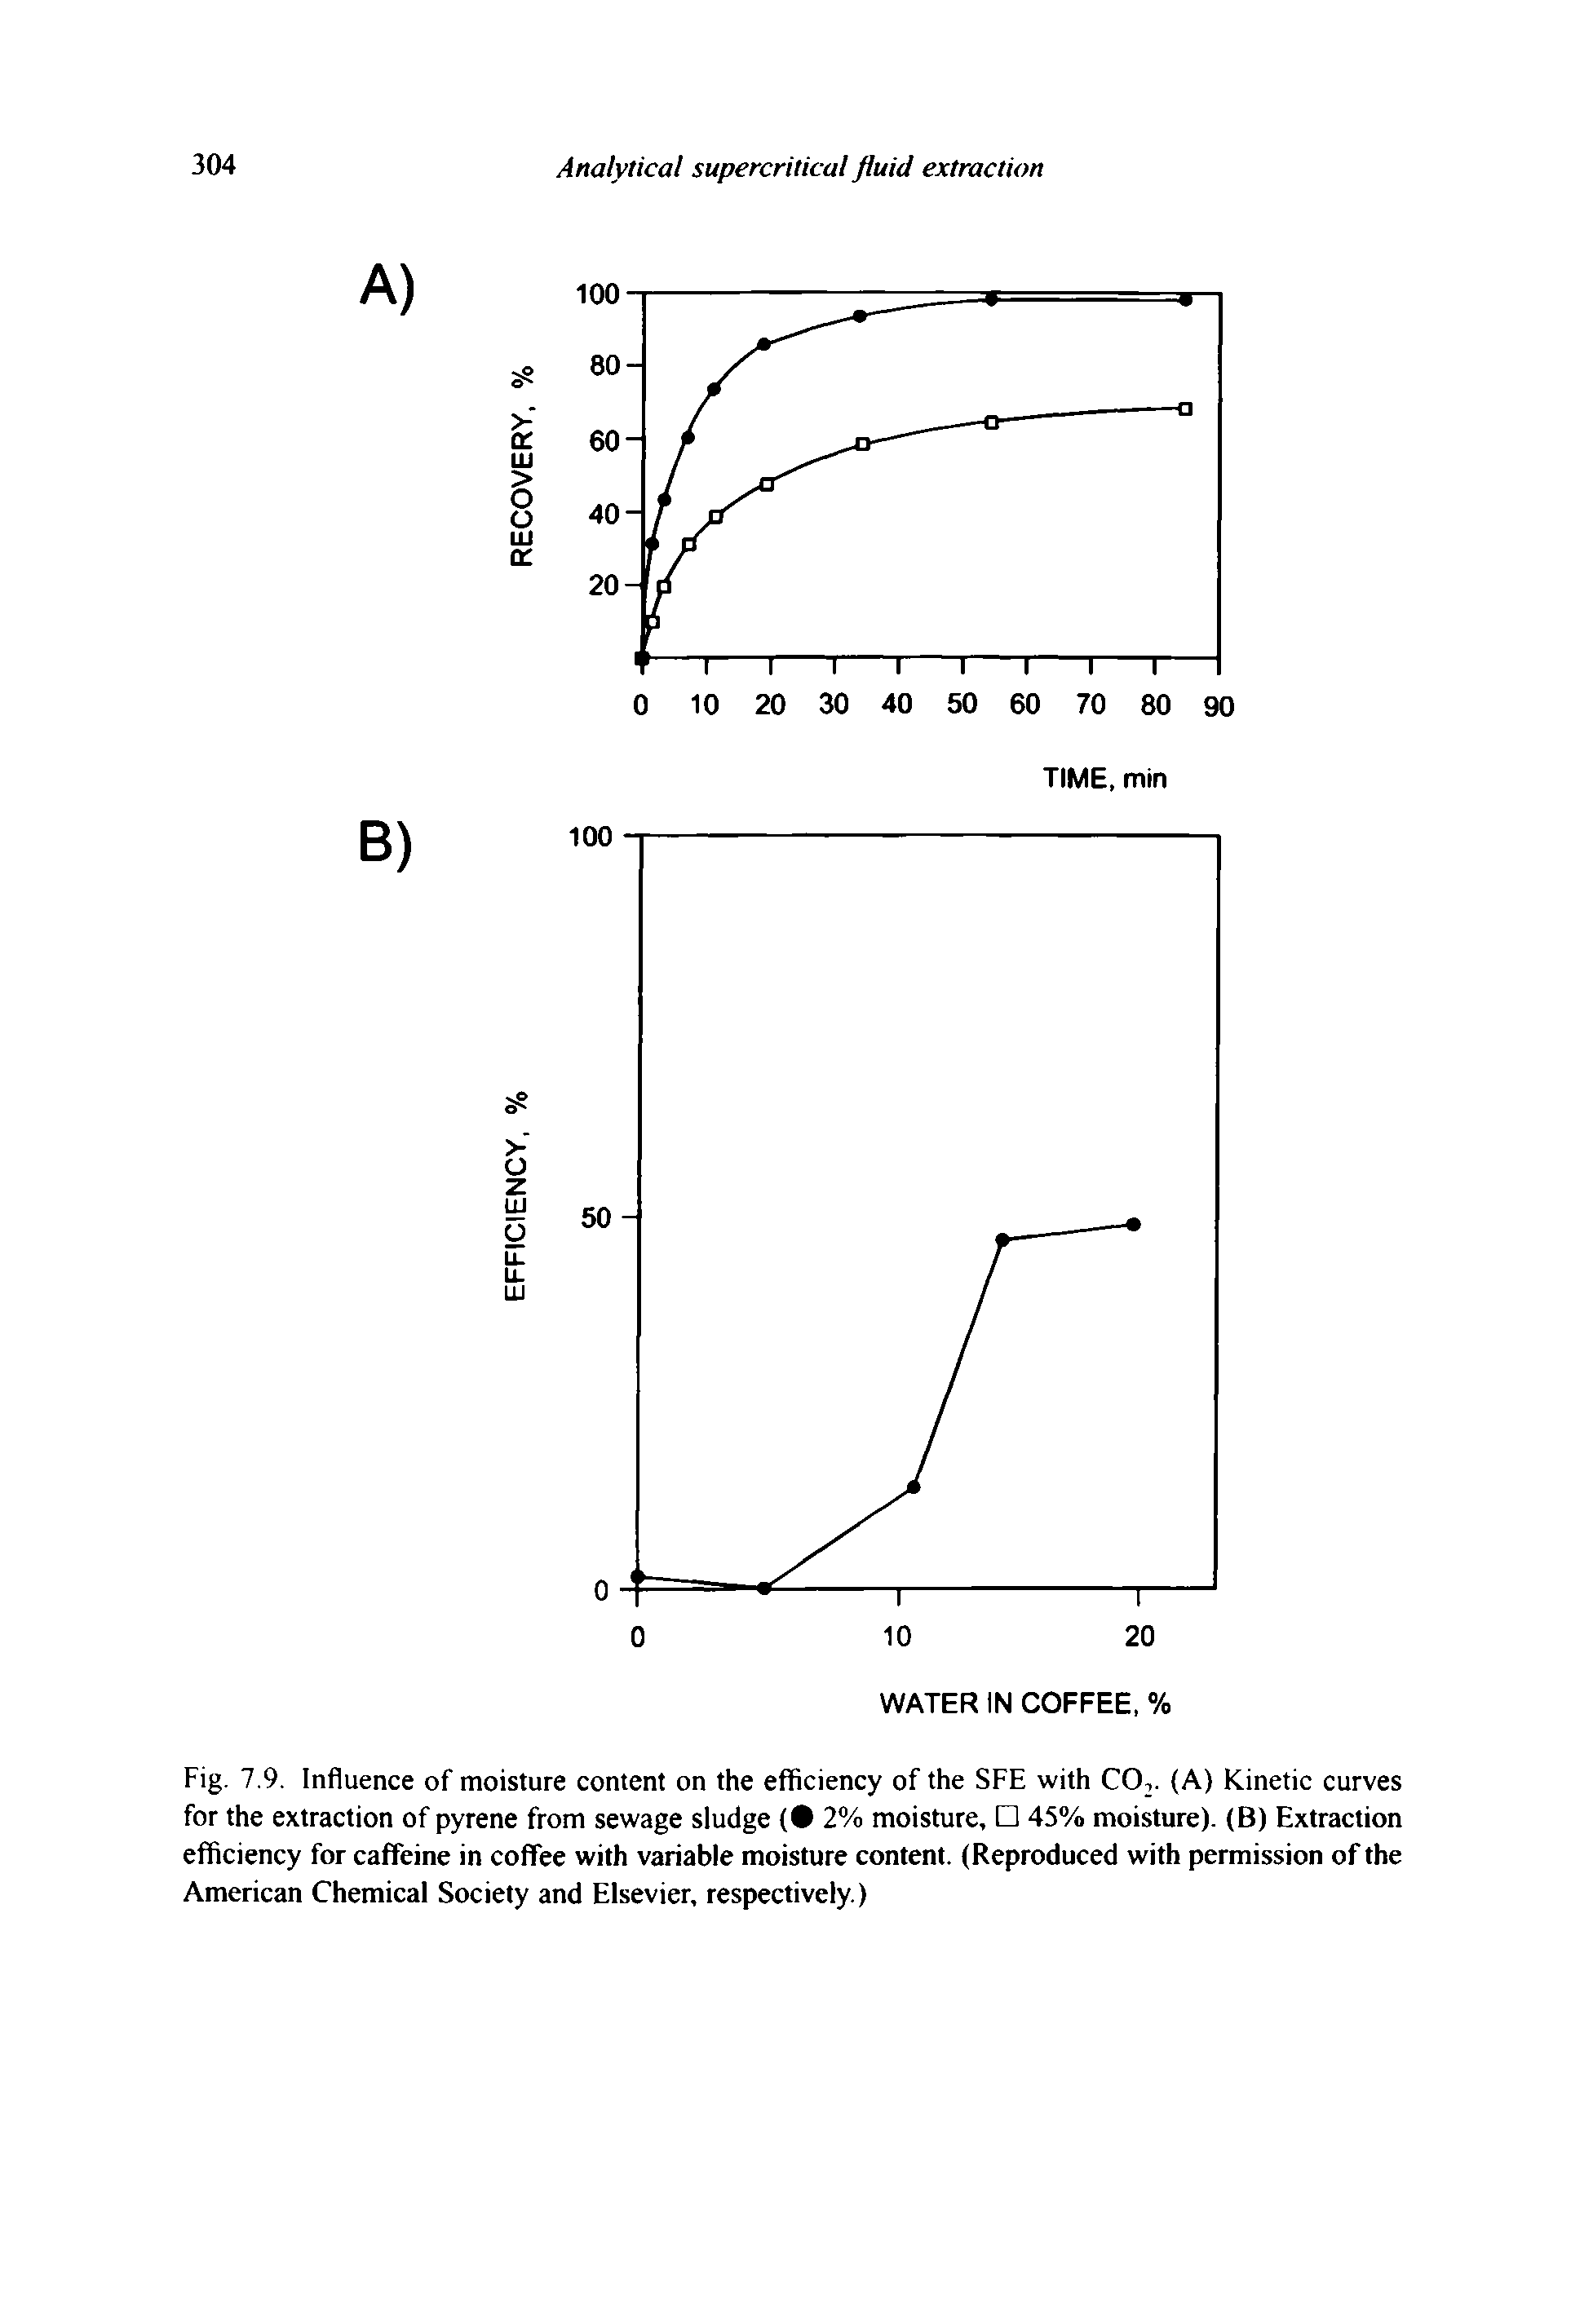 Fig. 7.9. Influence of moisture content on the efficiency of the SFE with CO,. (A) Kinetic curves for the extraction of pyrene from sewage sludge ( 2% moisture, 45% moisture). (B) Extraction efficiency for caffeine in coffee with variable moisture content. (Reproduced with permission of the American Chemical Society and Elsevier, respectively.)...